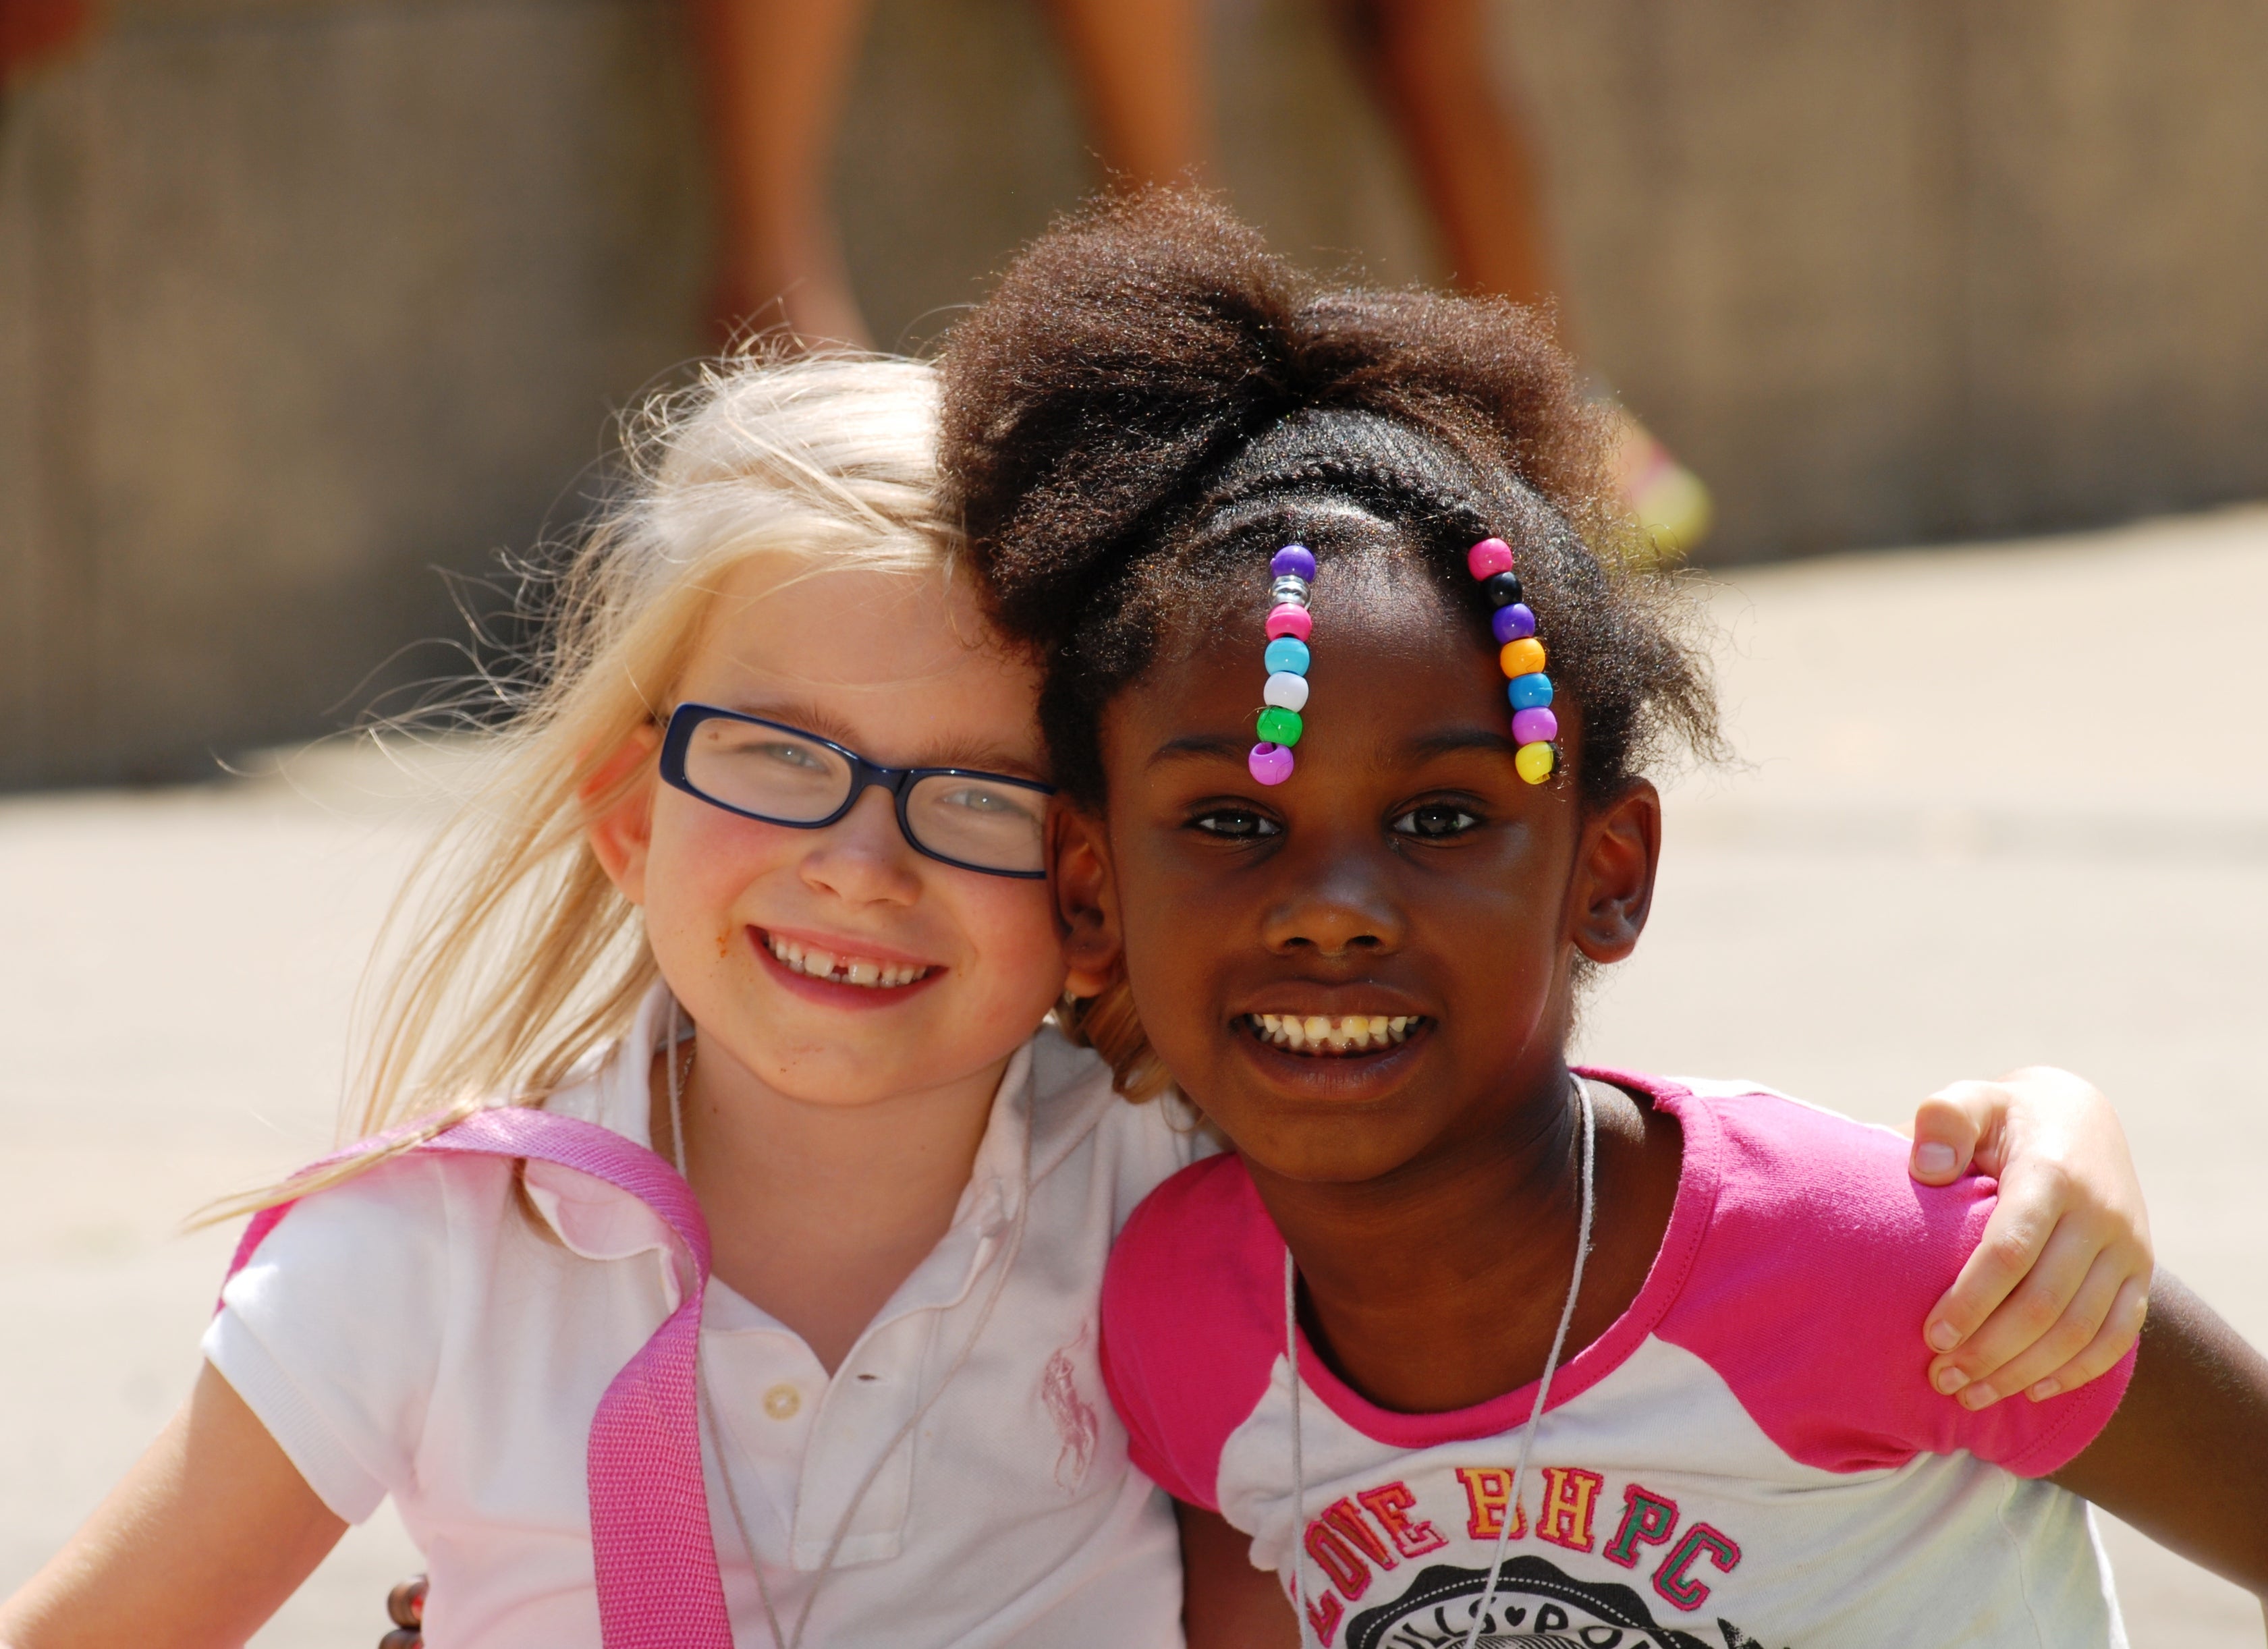 Two young girls smile at the camera.